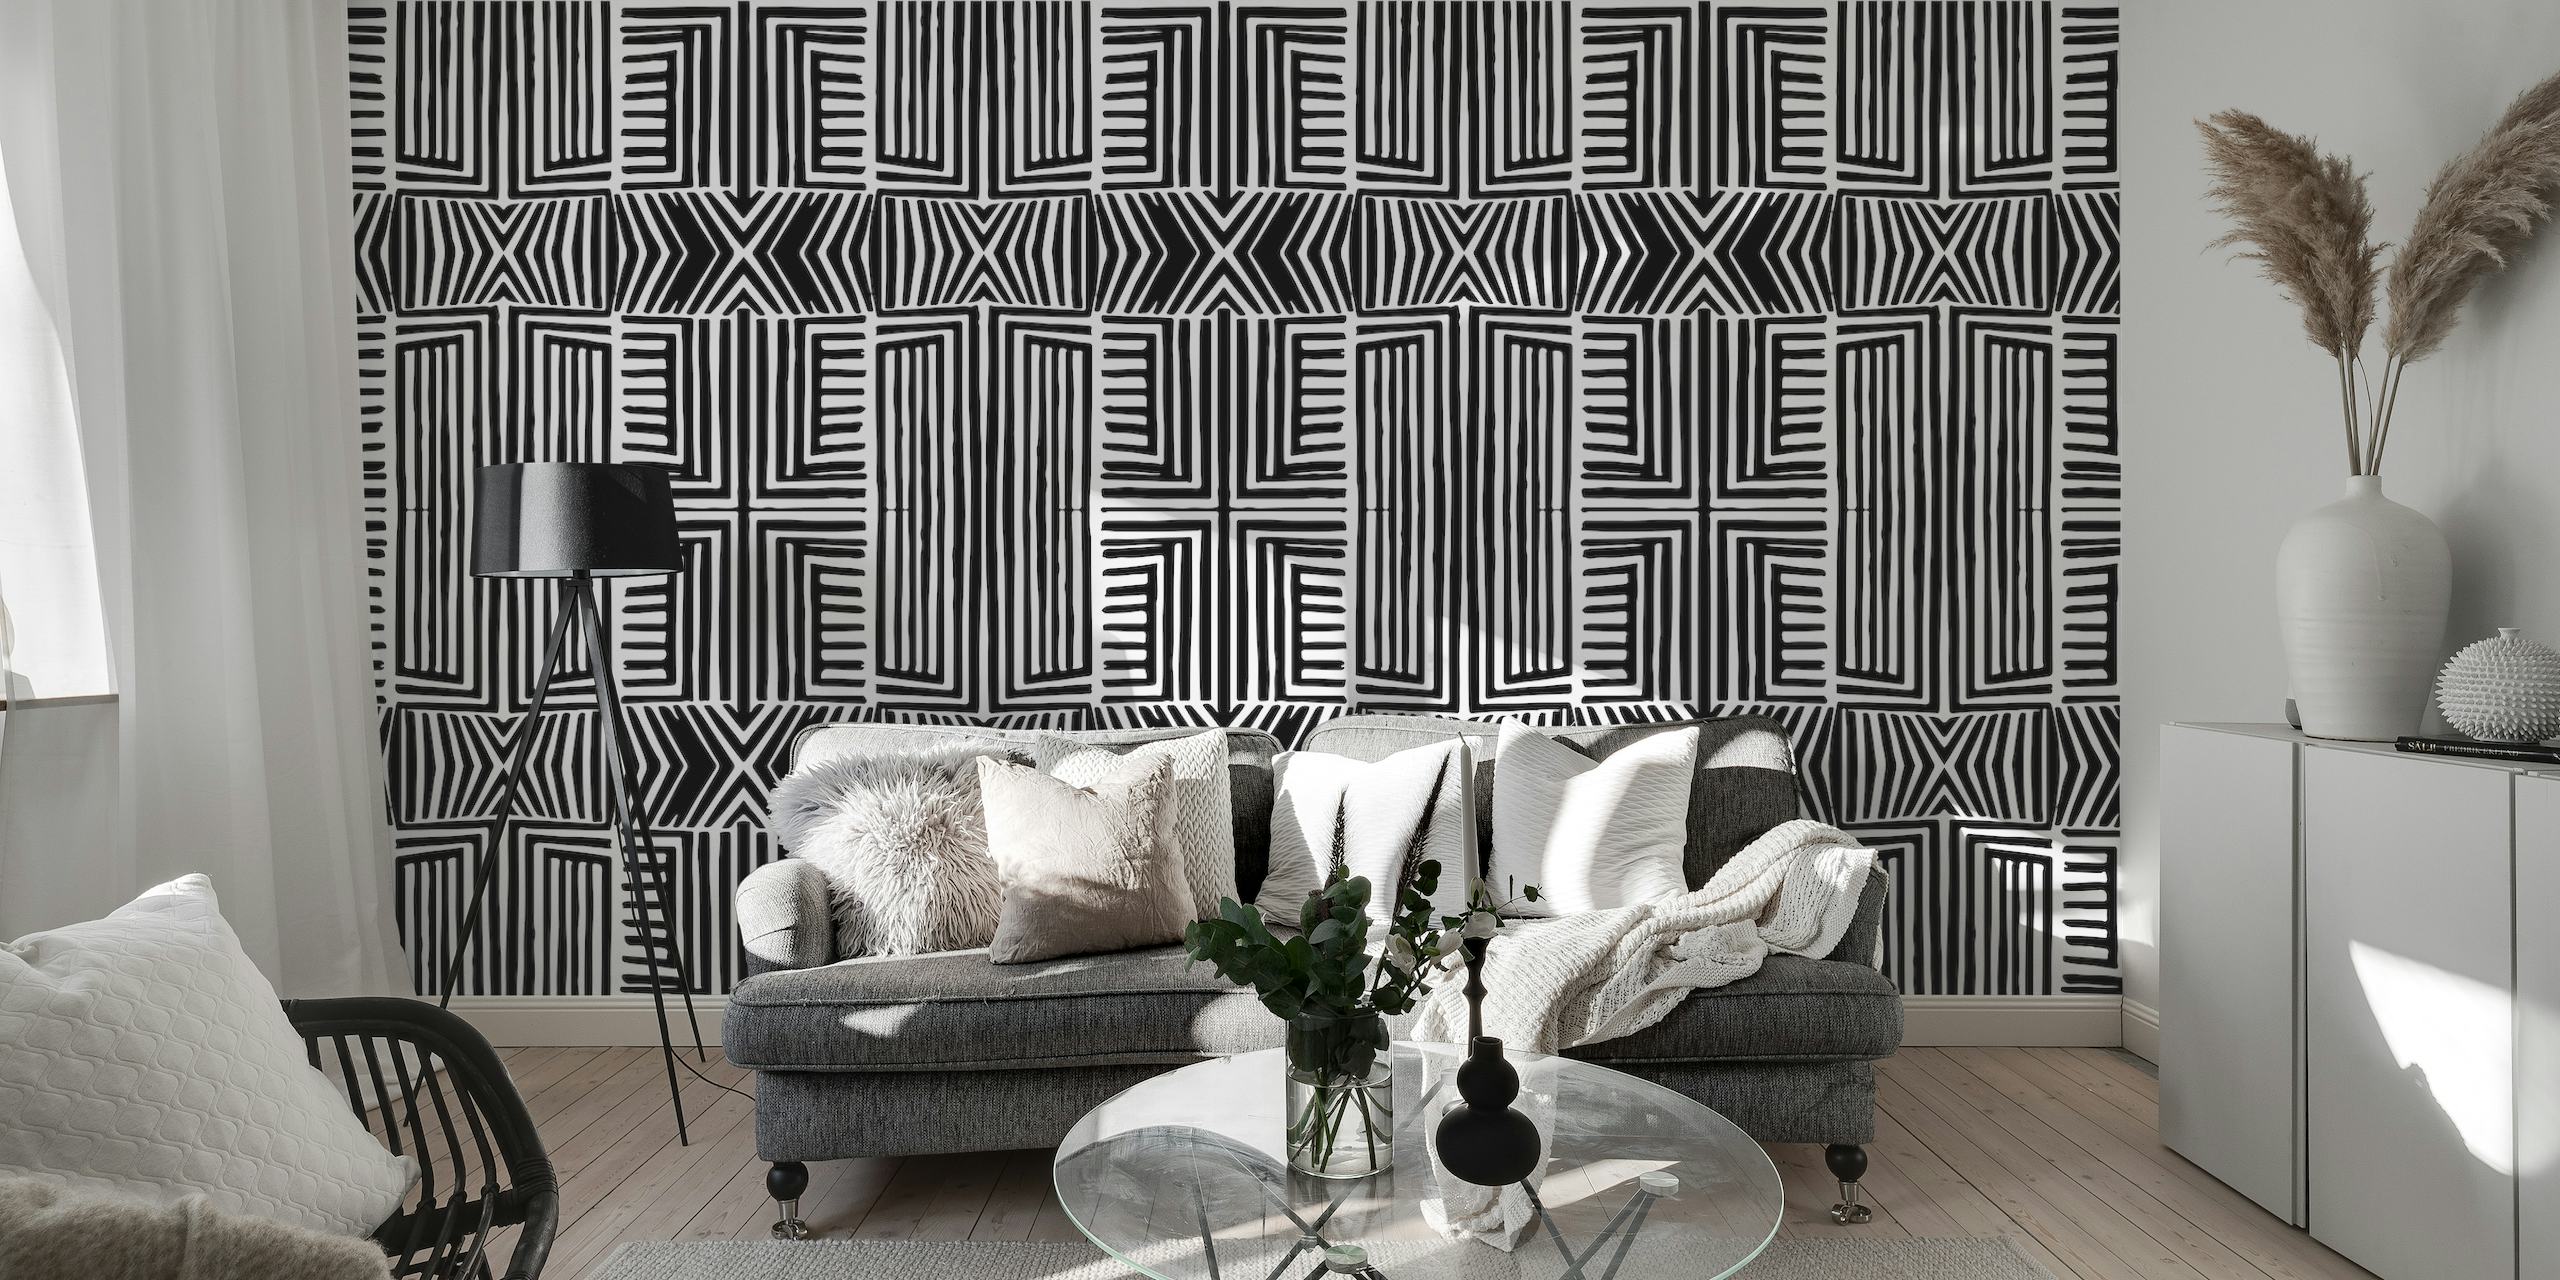 Black And White African Inspired Tribal Design papel pintado